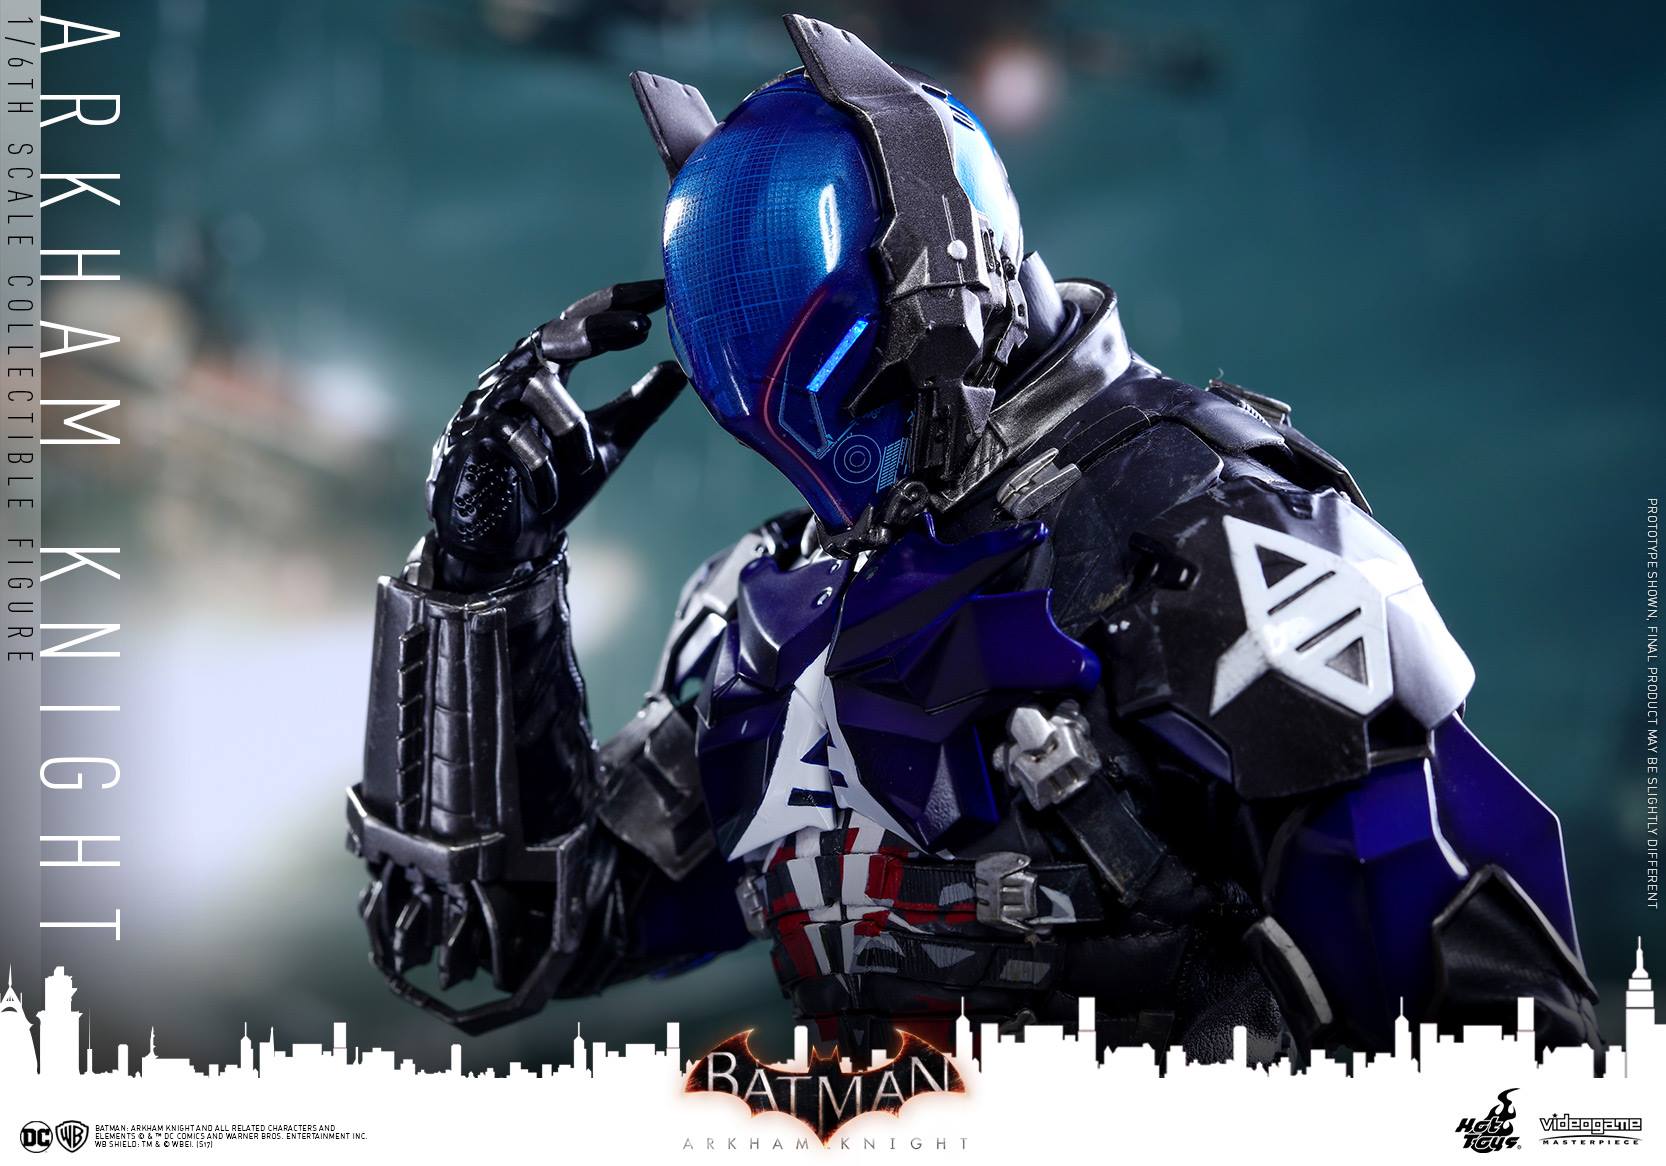 Check It Out: Hot Toys Arkham Knight